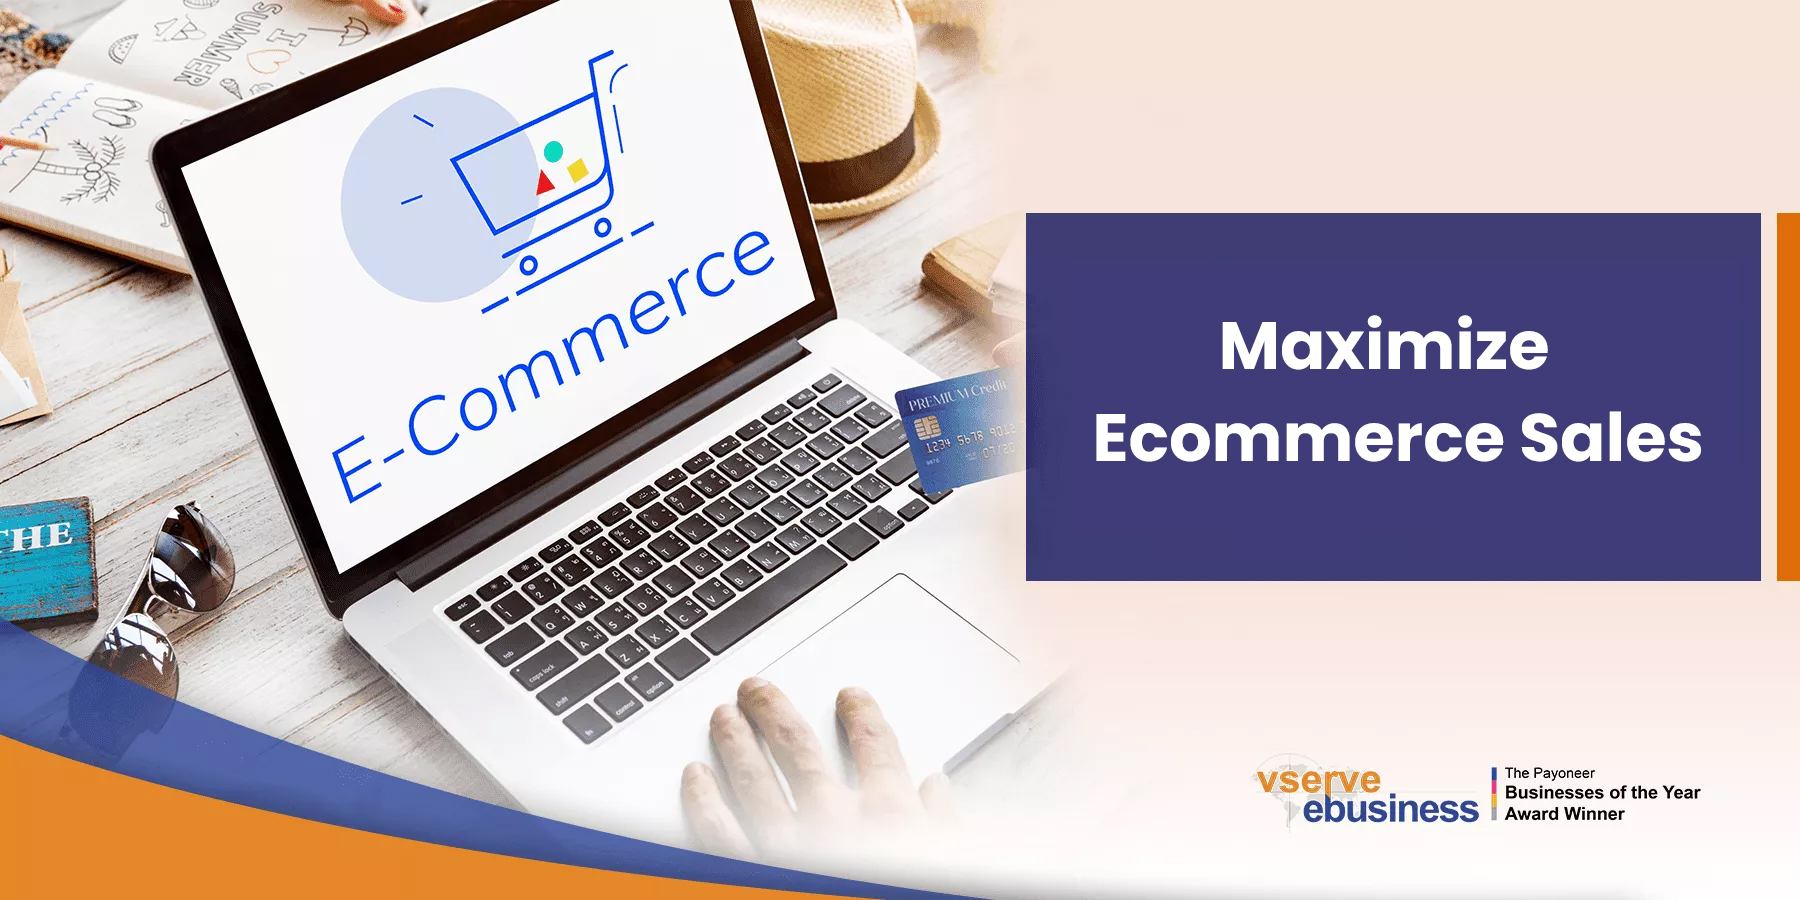 Maximize eCommerce Sales by Product Data Entry Services